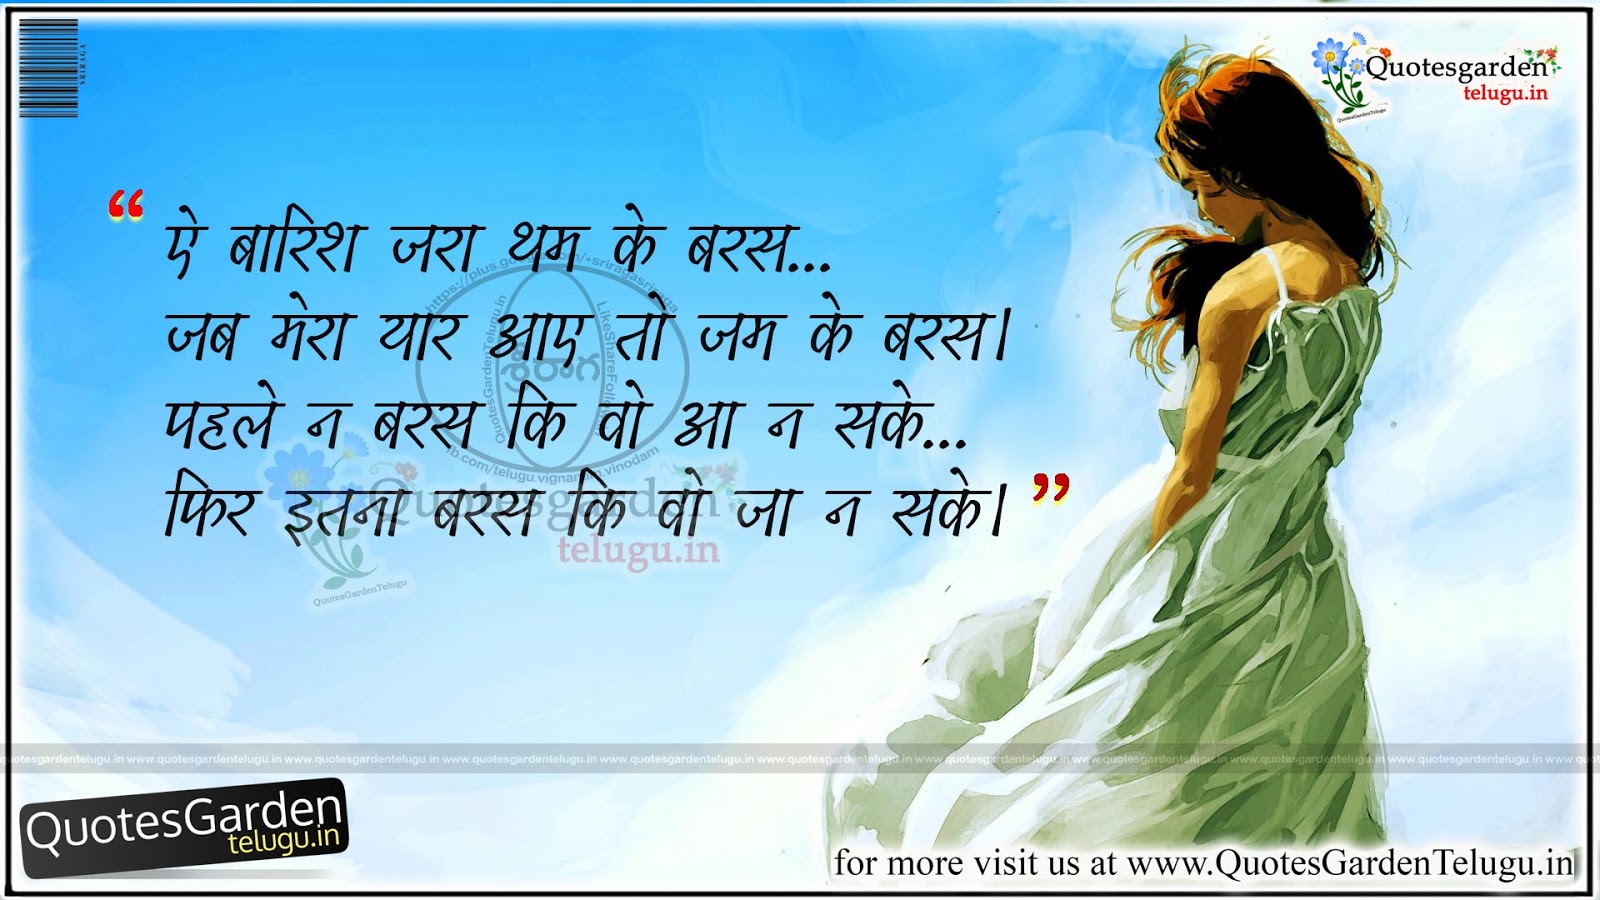 Best Friendship Quotes in Hindi images sms messages | QUOTES ...